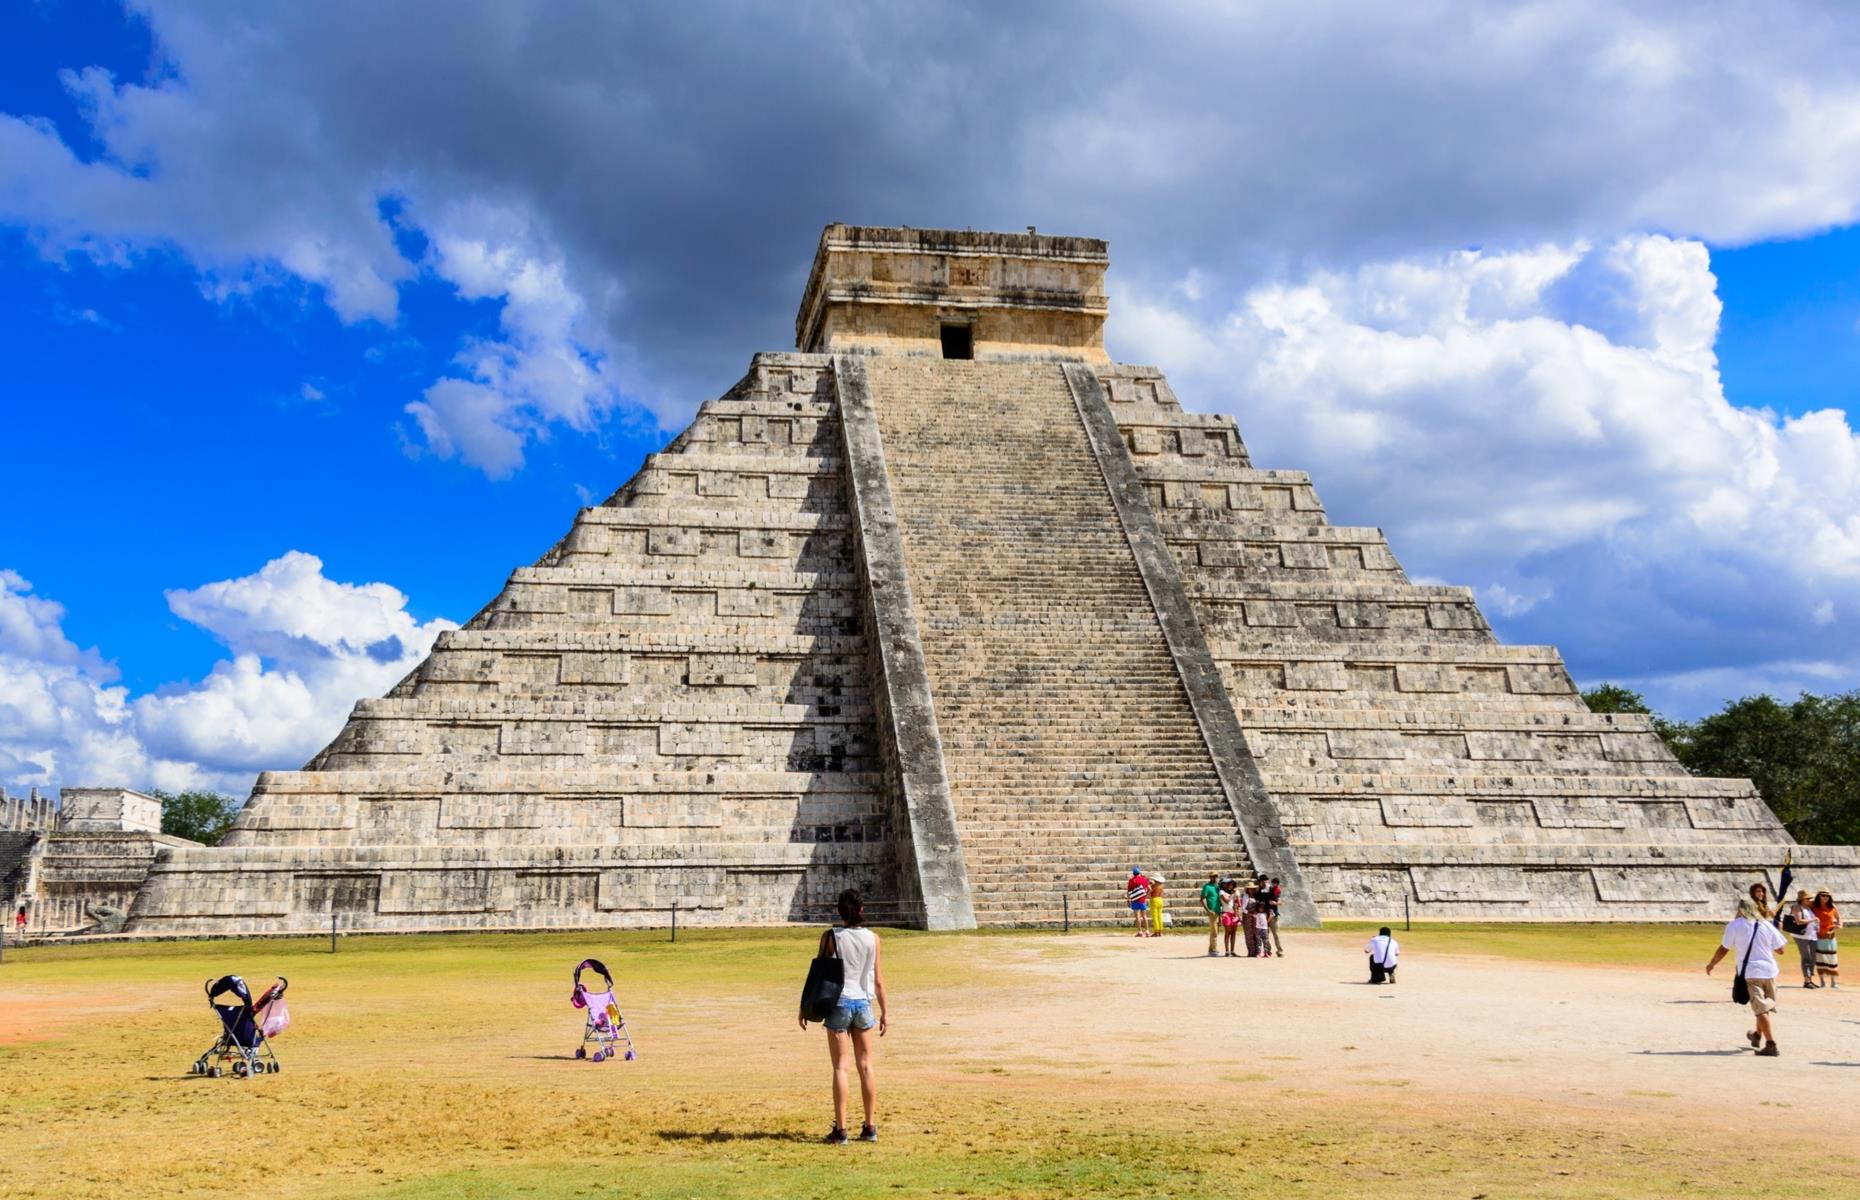 <p>One of Mexico’s most famous Maya sites, the magnificent Chichen Itza in the Yucatan dates back to around AD 800. The focal point is the 78-foot-high (24m) Temple of Kukulkan, also known as El Castillo (pictured). Created as a physical calendar, it aligns with the sun so perfectly that on the spring and summer equinox, it creates a shadow of a serpent slithering down the steps. </p>  <p><strong><a href="https://www.loveexploring.com/galleryextended/157264/inside-the-ancient-temples-of-the-americas?page=1">See inside the other ancient temples of the Americas</a></strong></p>